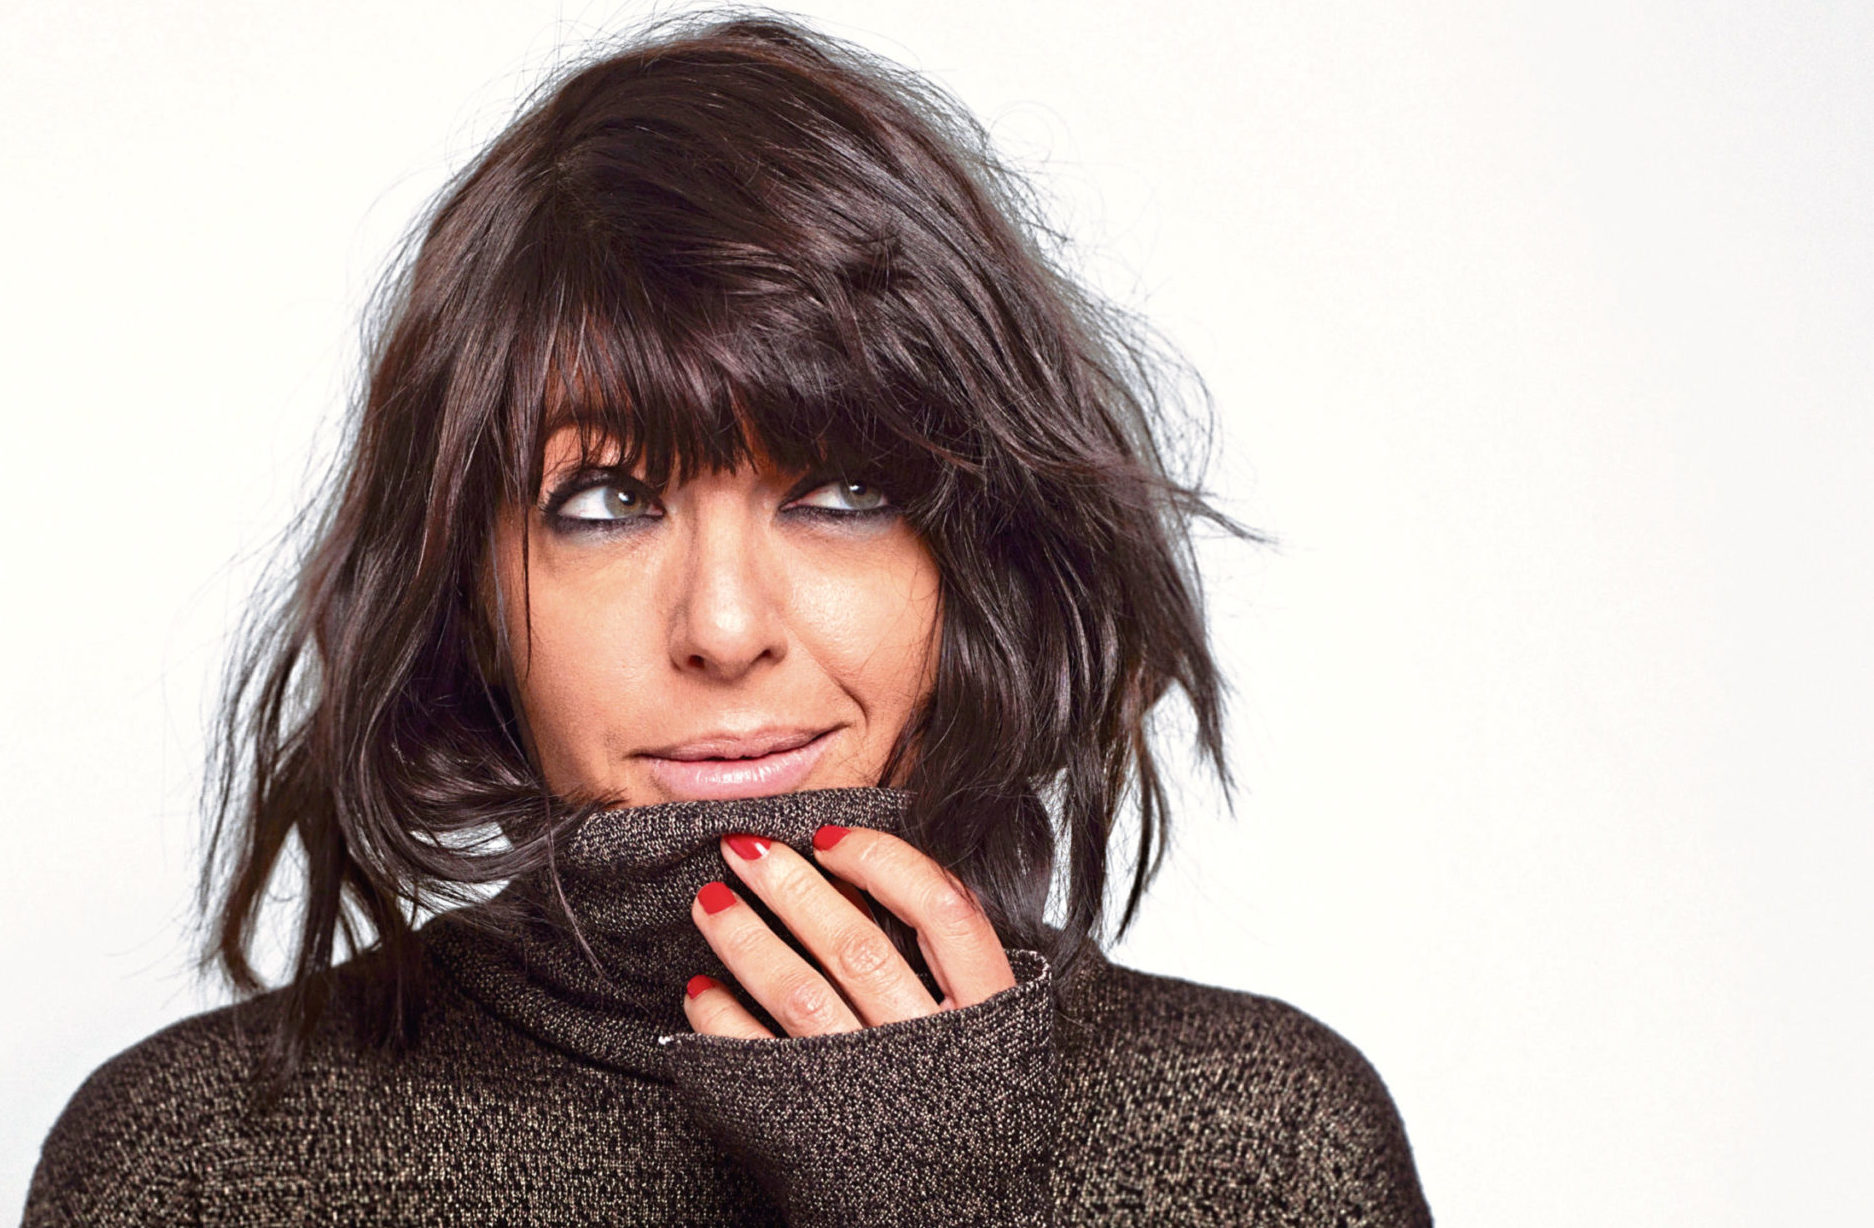 Strictly Come Dancing host Claudia Winkleman has baby boy | Claudia  winkleman hair, Claudia winkleman, Medium bob hairstyles